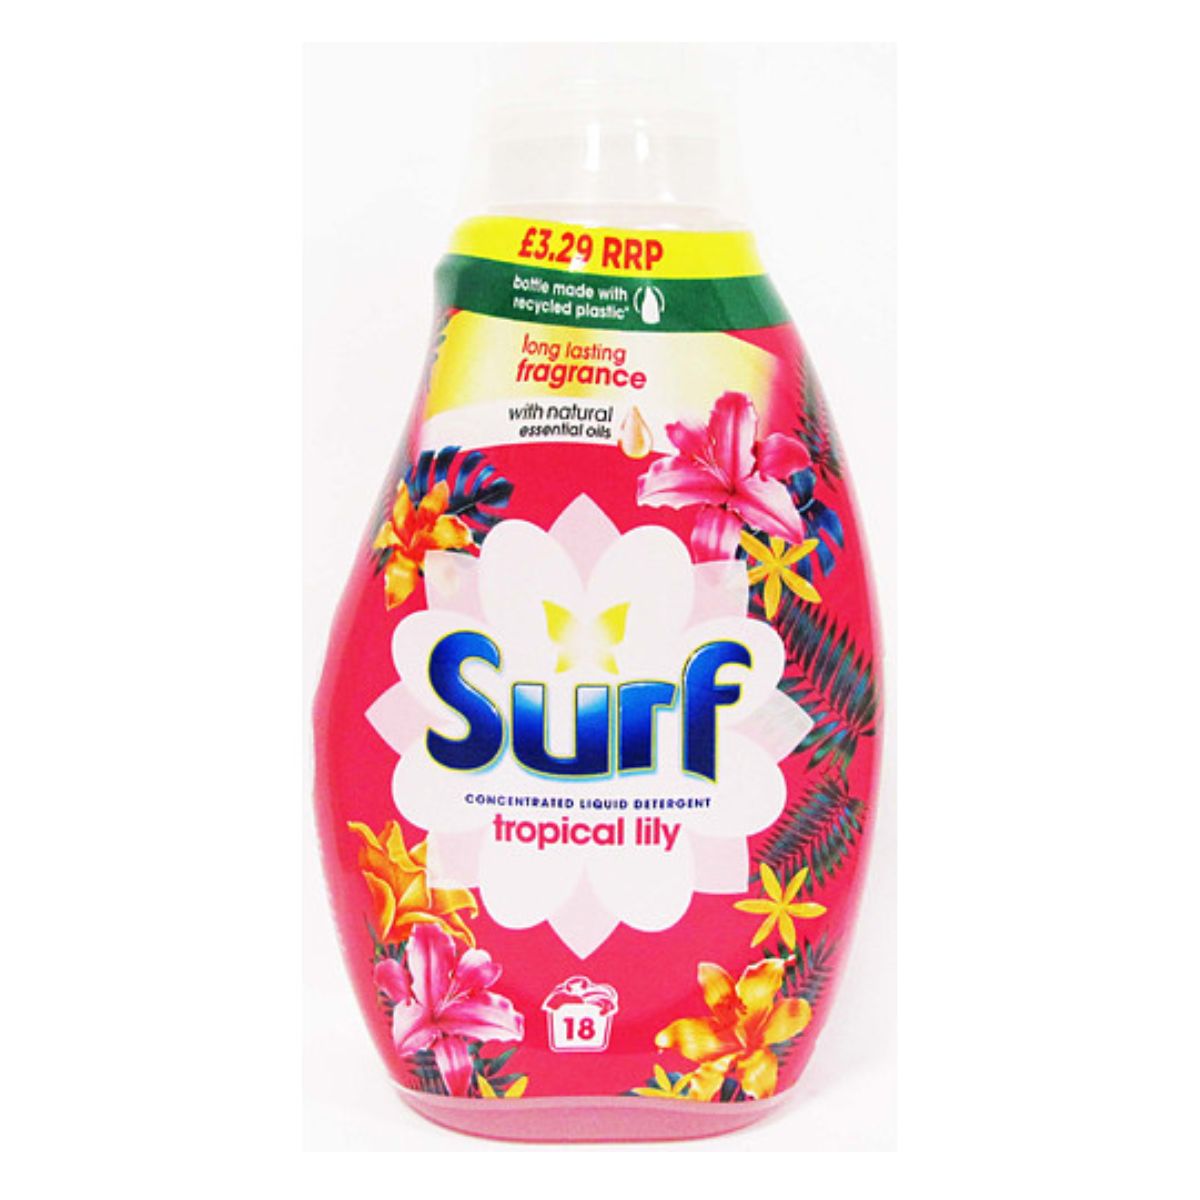 A bottle of Surf - Concentrated Liquid Laundry Detergent Tropical Lily - 486ml on a white background.